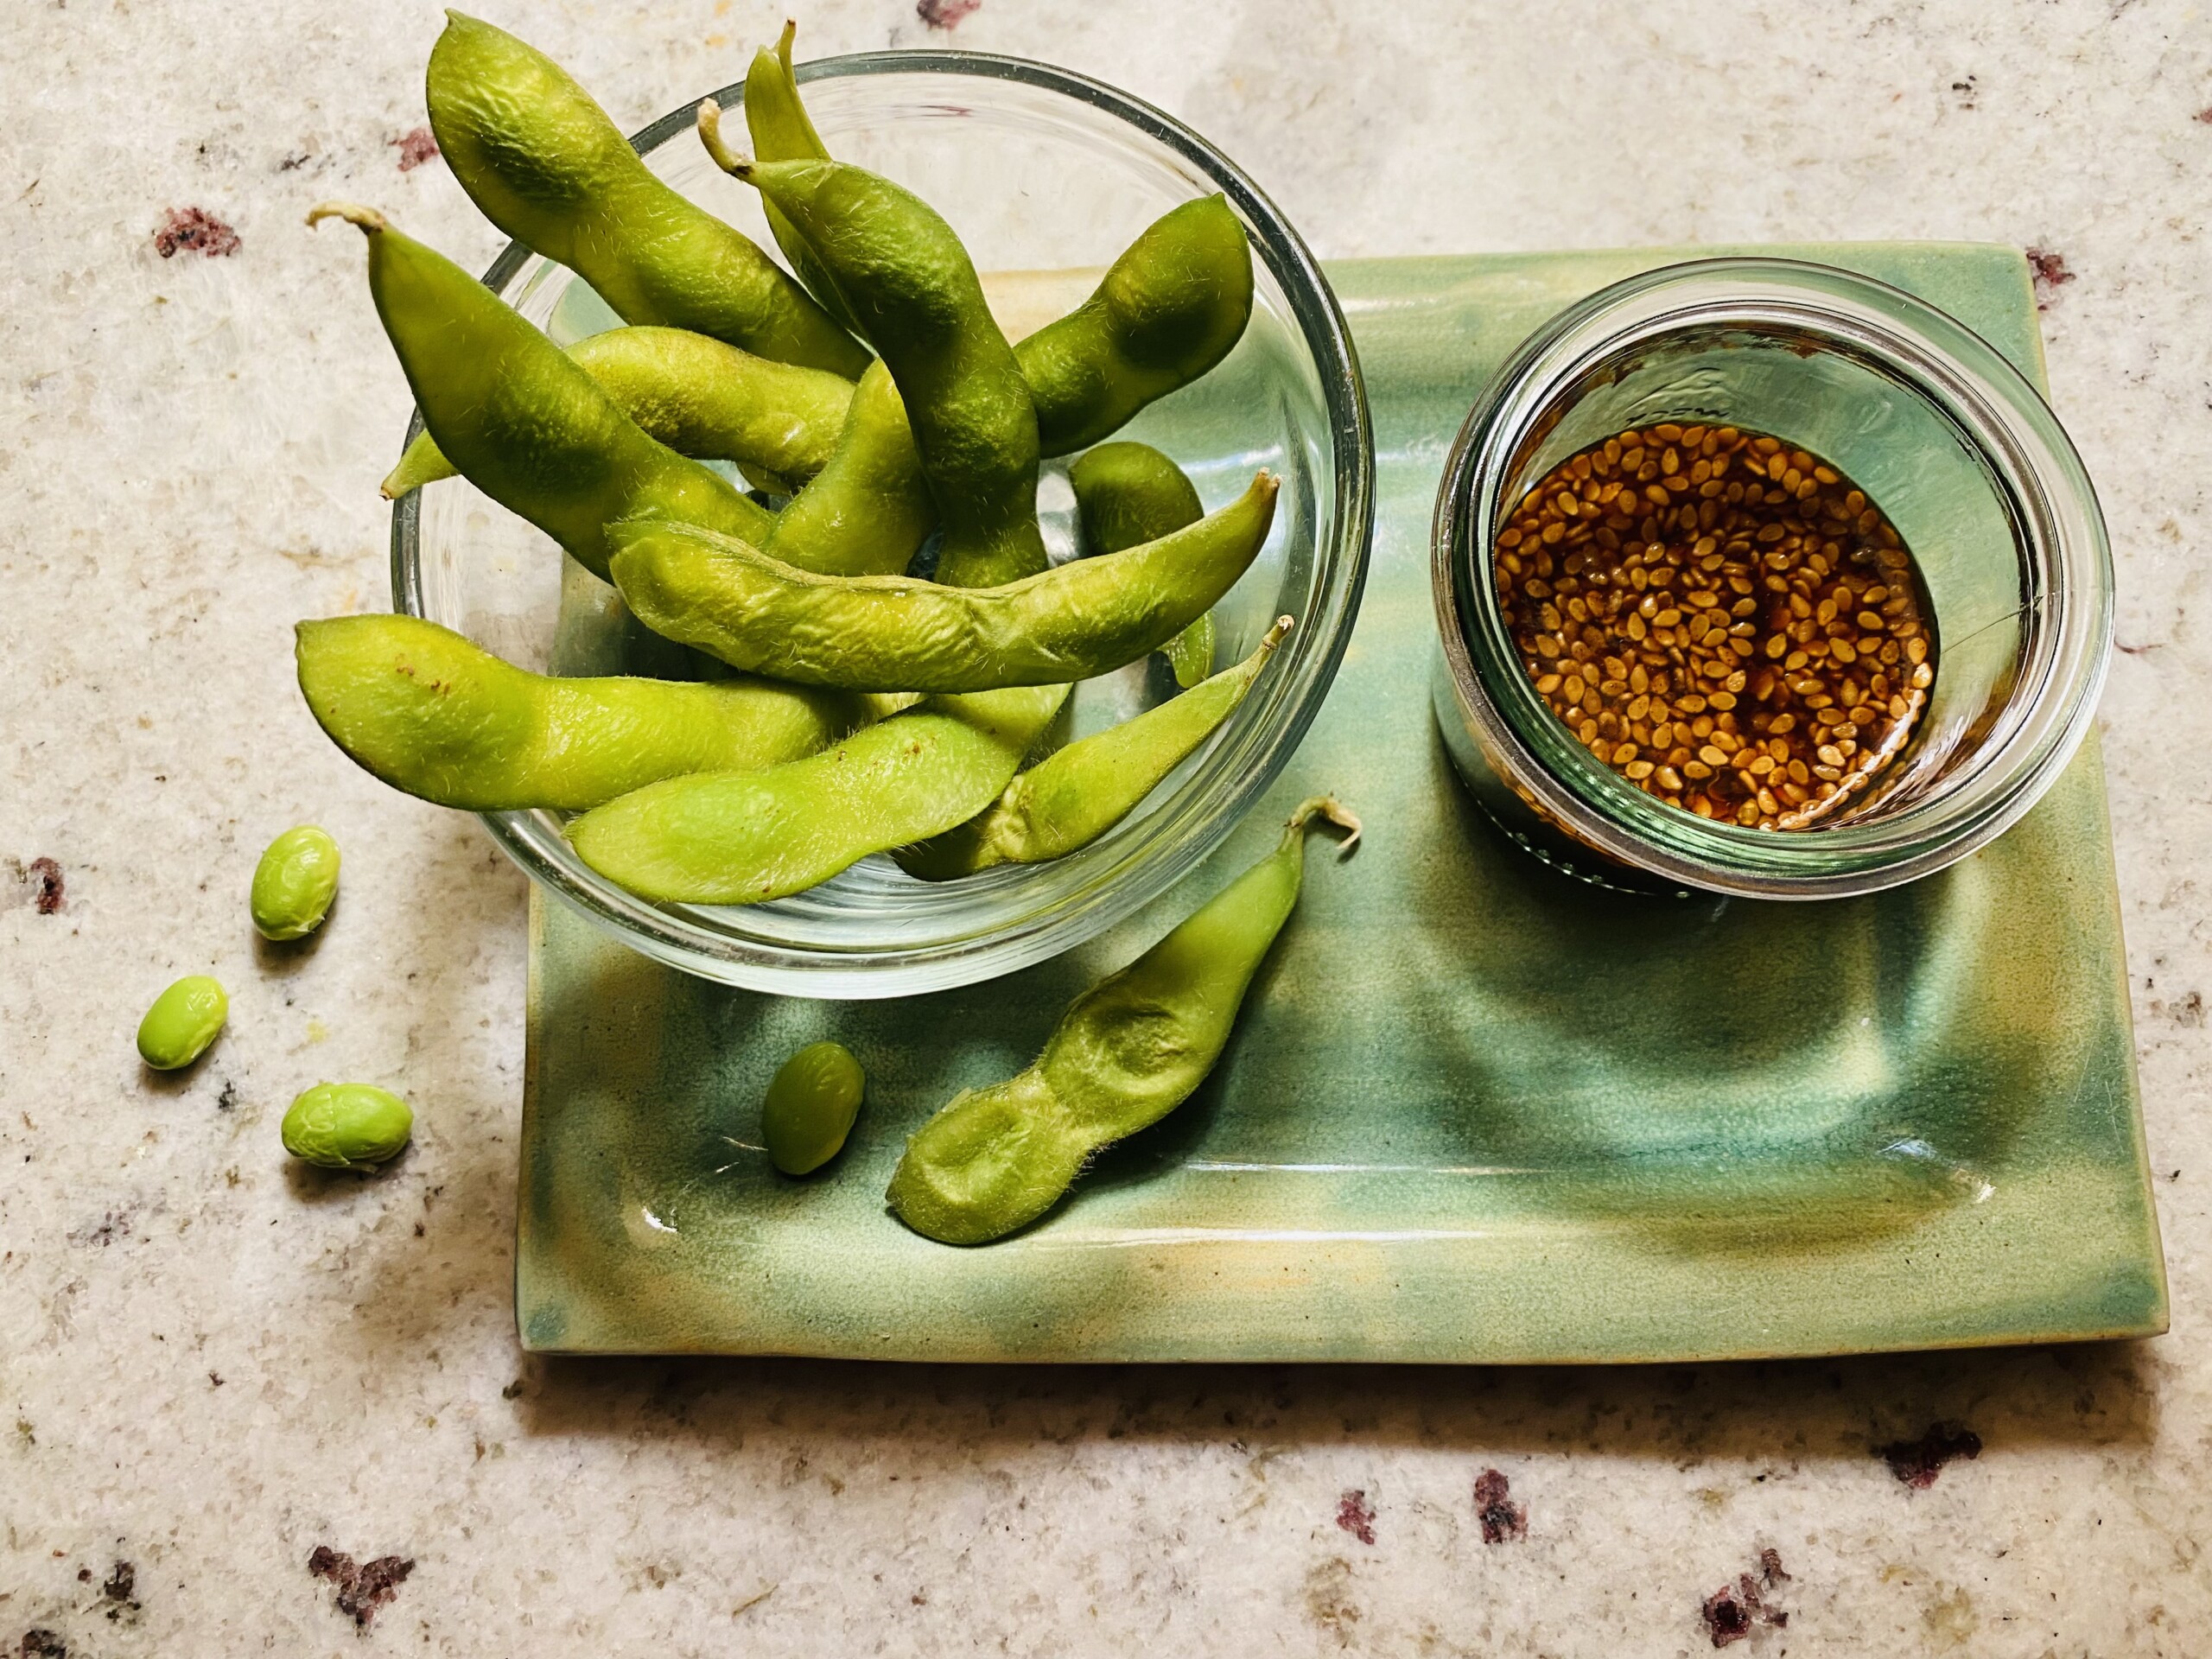 Super Simple Edamame Appetizer and Dipping Sauce